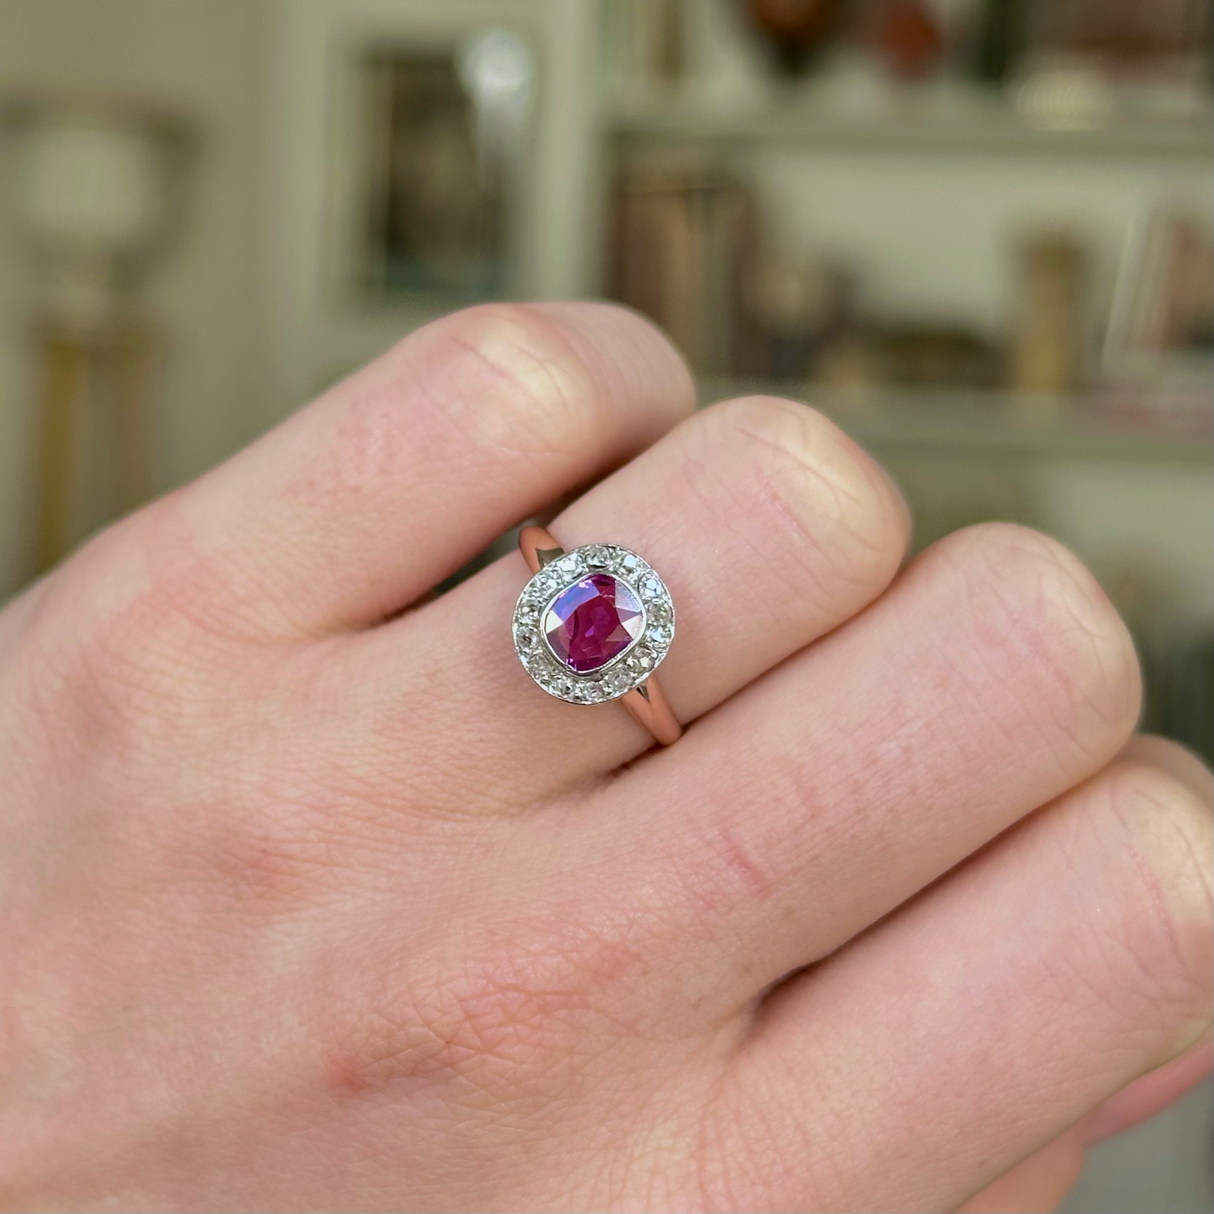 Antique, Edwardian Pink Sapphire and Diamond Cluster Ring, 18ct Yellow Gold and Platinum worn on closed hand.